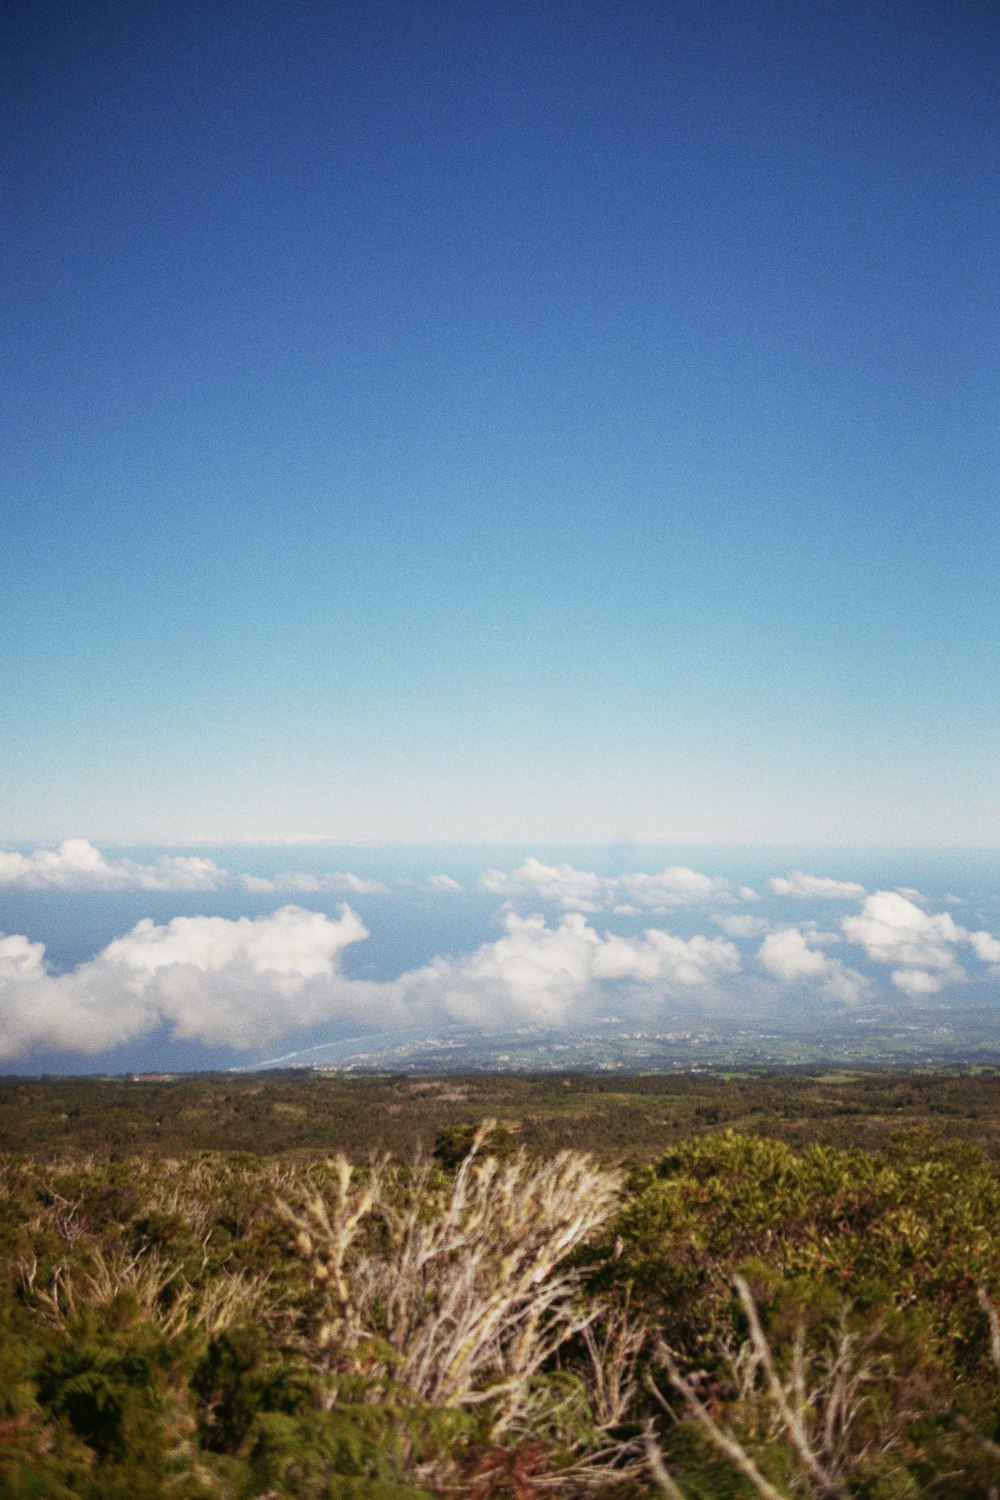 a view of the sky and clouds from the top of a hill